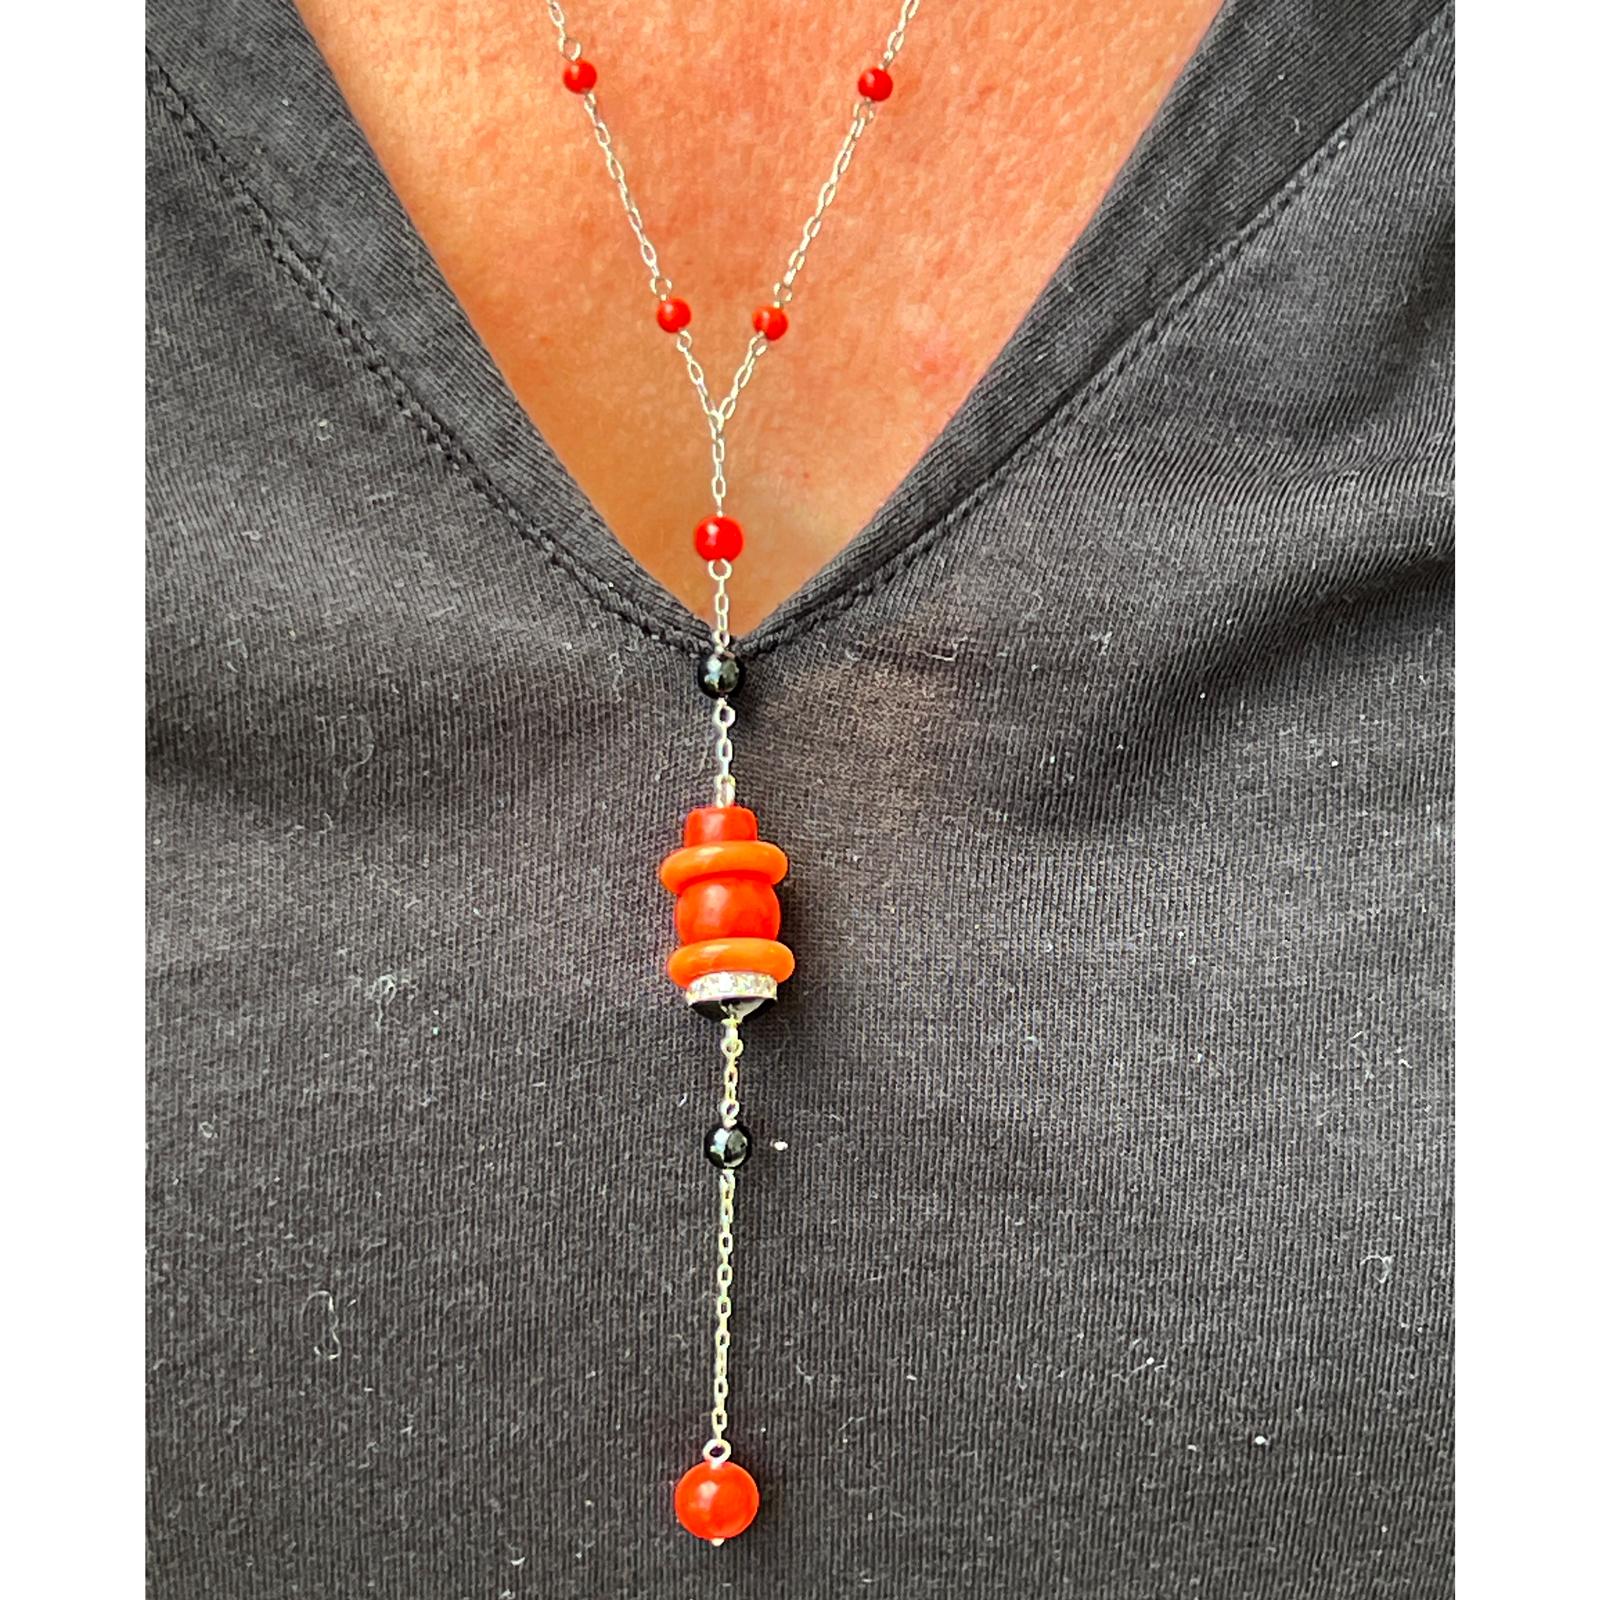 1970's coral, onyx, and diamond Y drop necklace handcrafted in platinum. The necklace features coral and onyx beads set with 12 diamonds weighing approximately .25 CTW graded H/VS. The platinum link necklace measures 20.5 inches in length and the